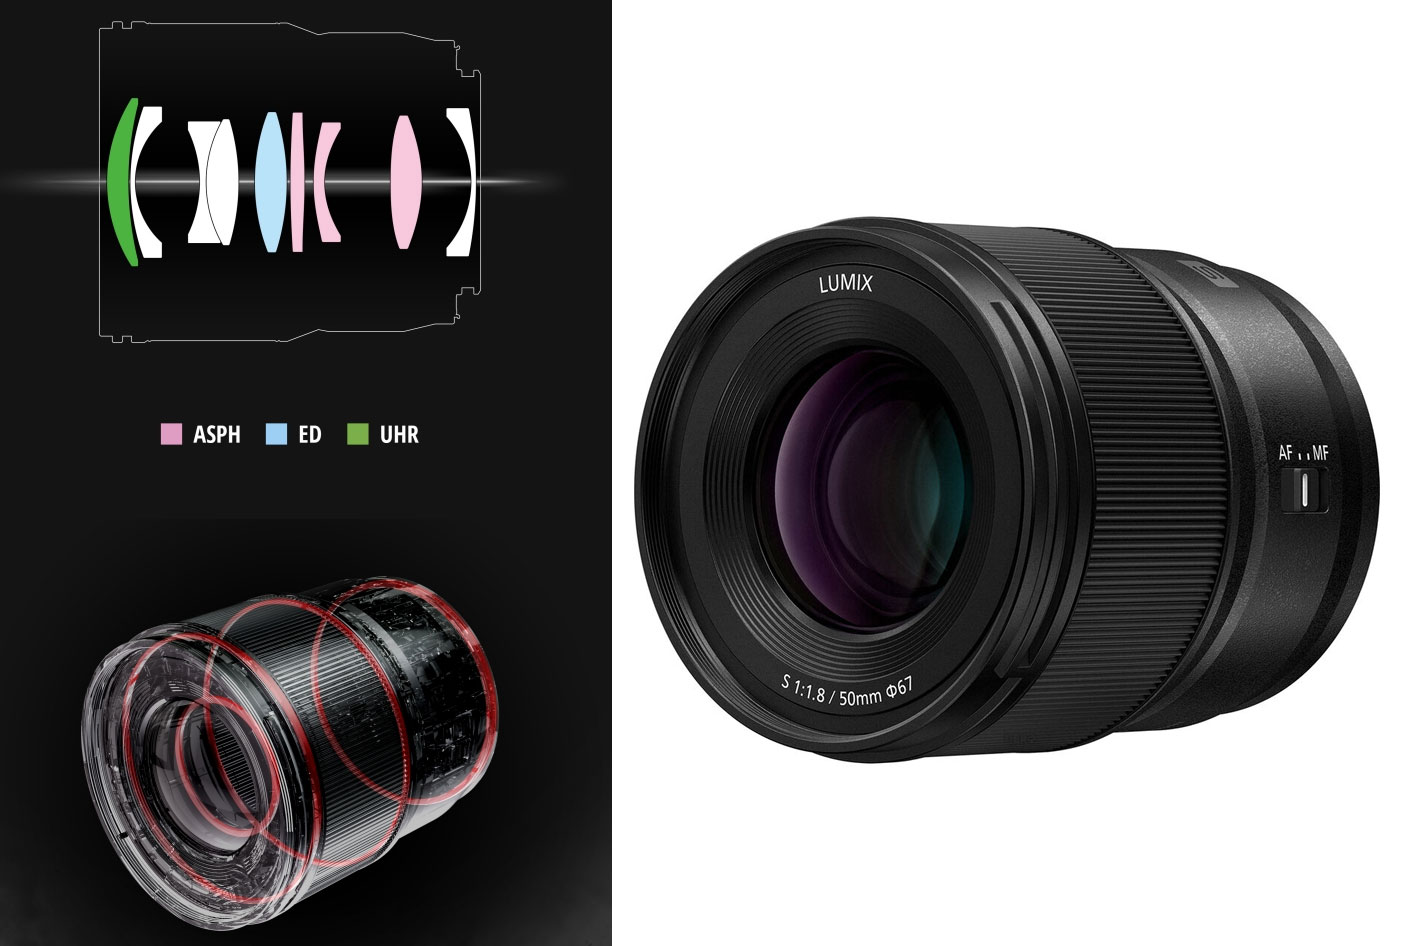 New Panasonic LUMIX S 50mm F1.8: ideal for video recording